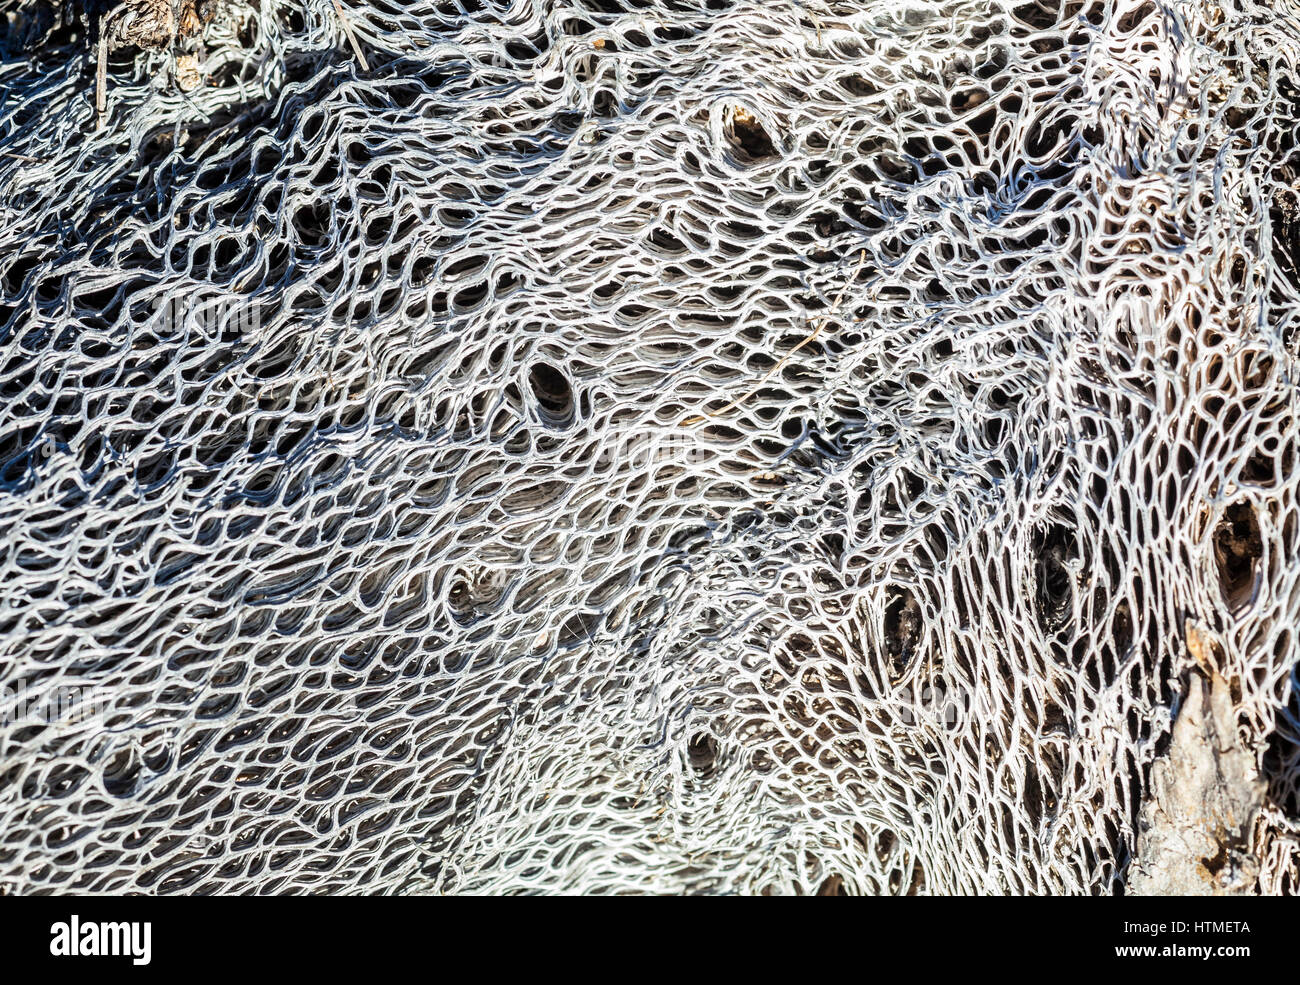 Deteriorating cactus showing inside structure. Stock Photo